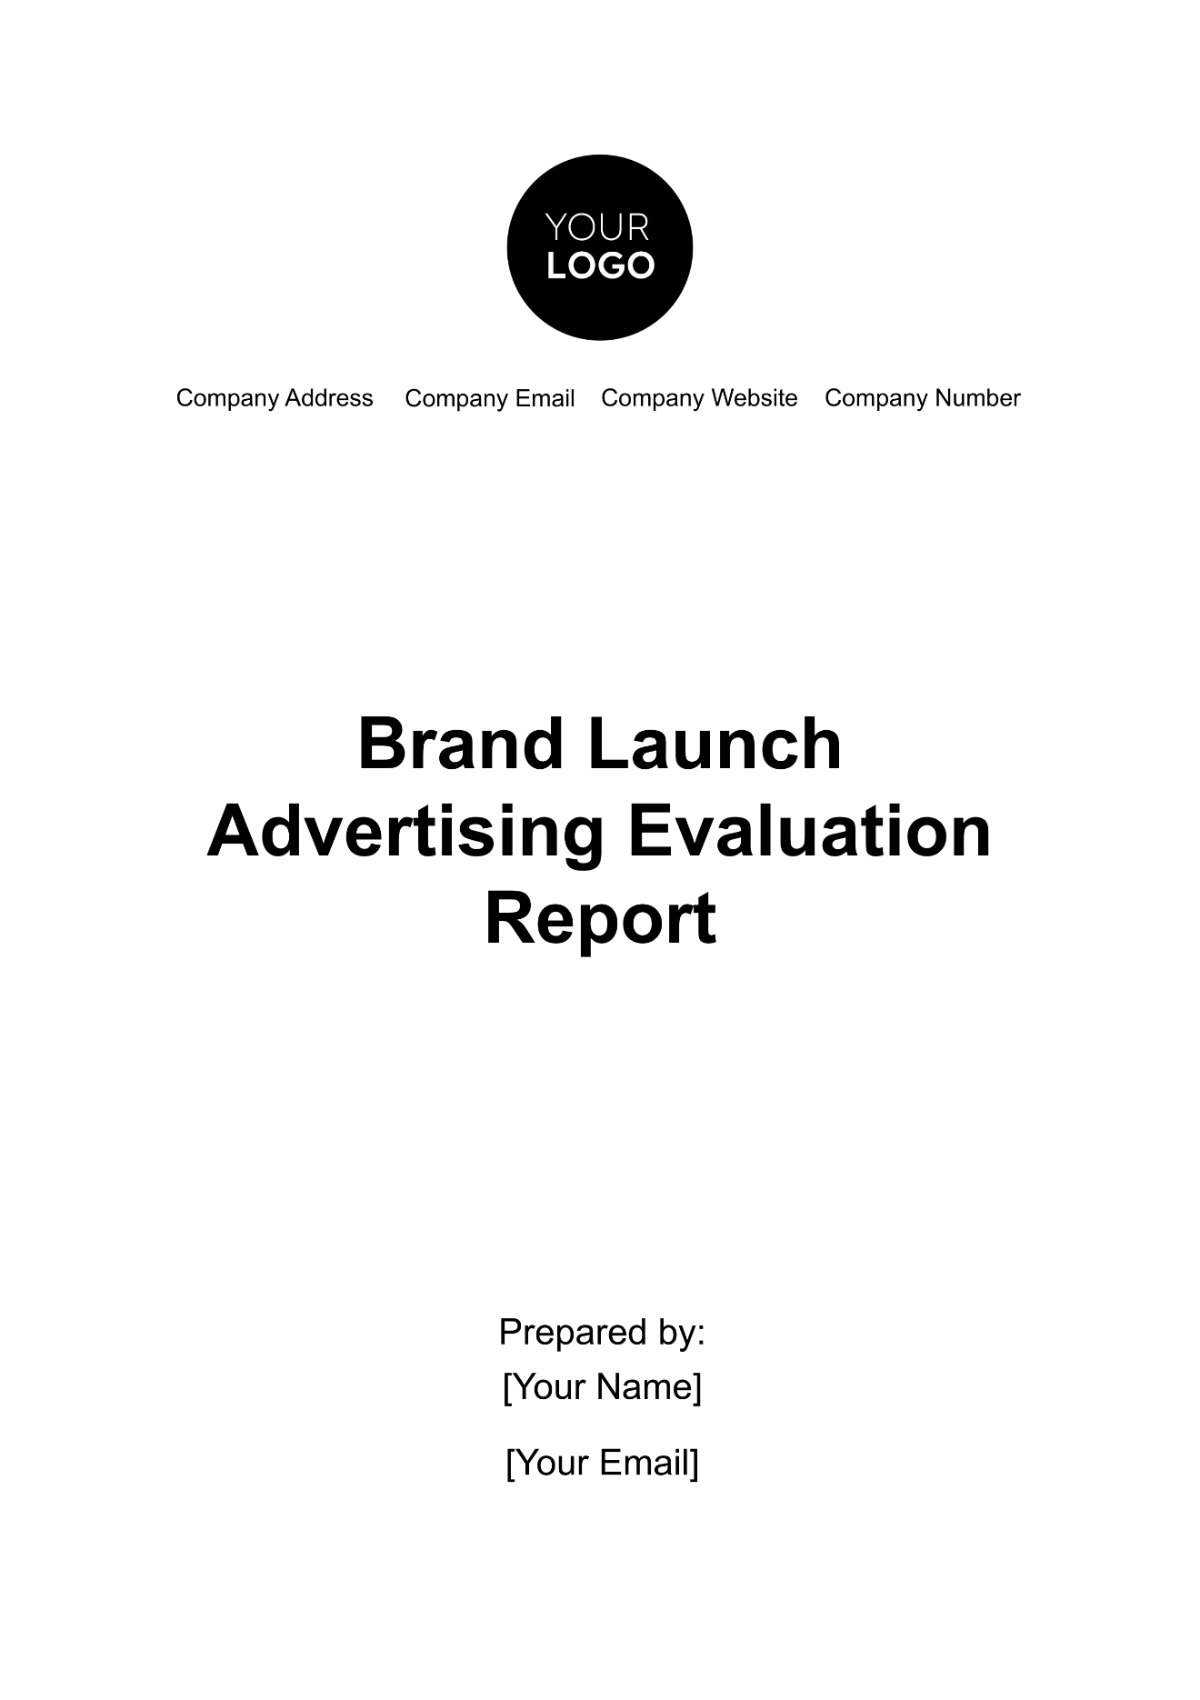 Brand Launch Advertising Evaluation Report Template